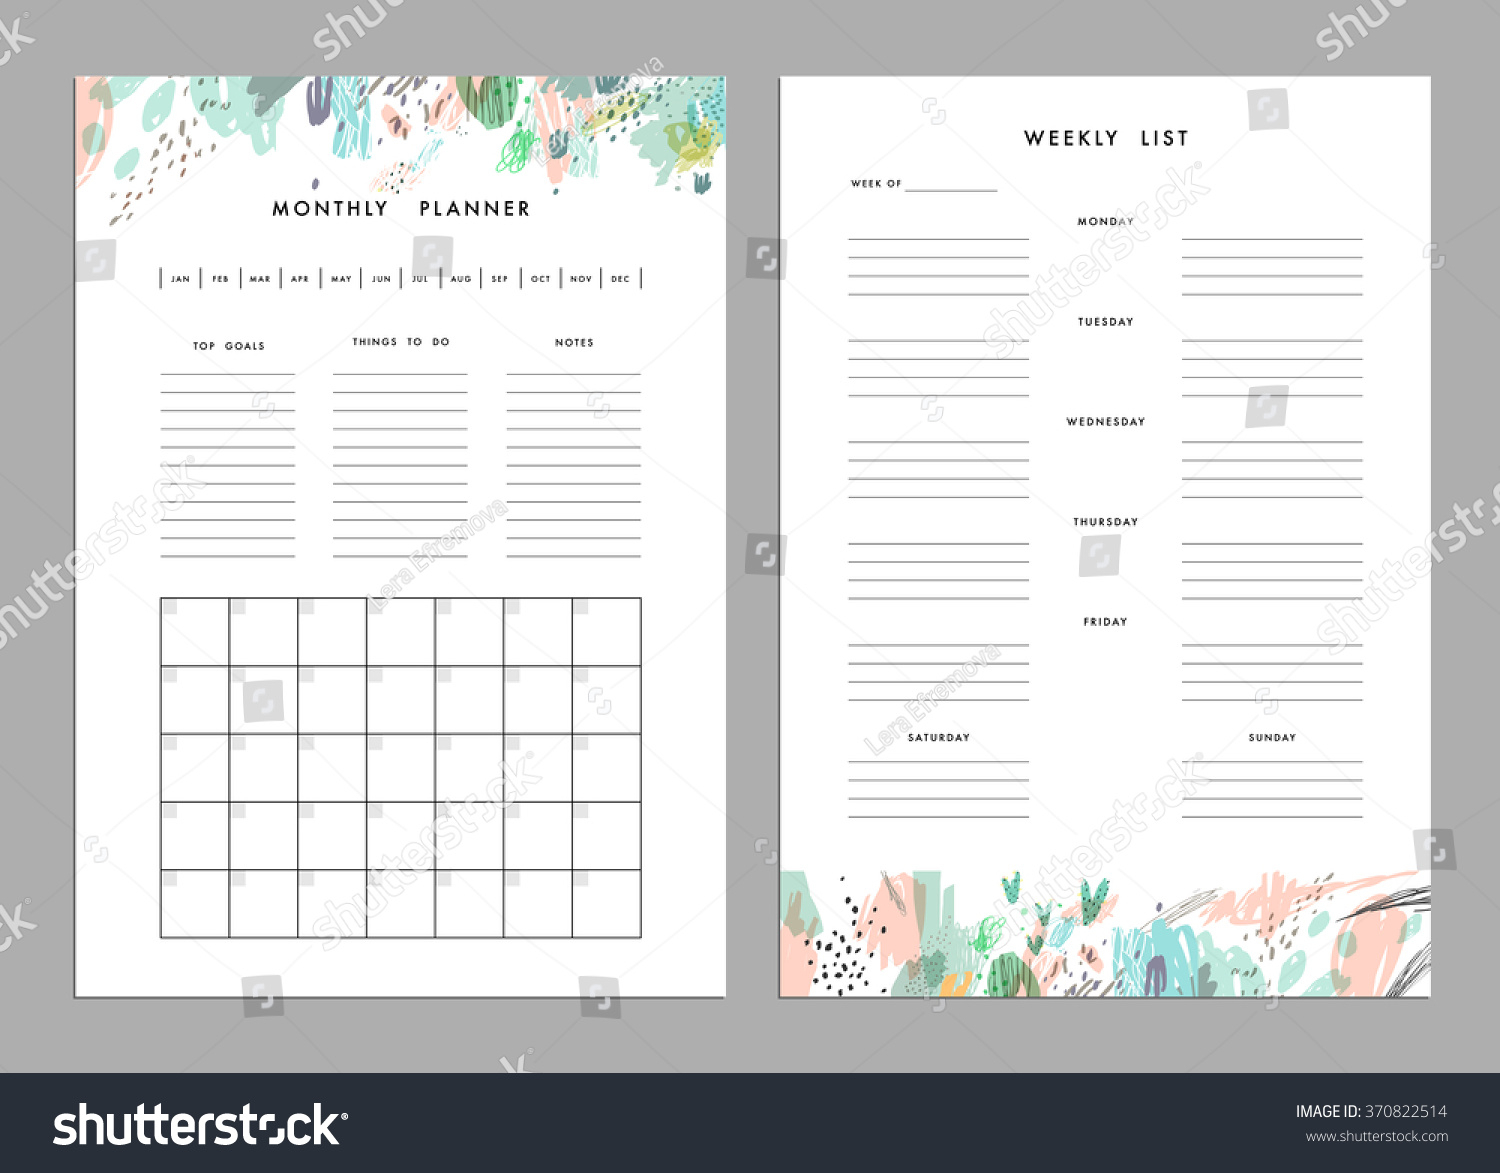 Monthly Planner Plus Weekly List Templates Stock Vector With Notes Plus Templates